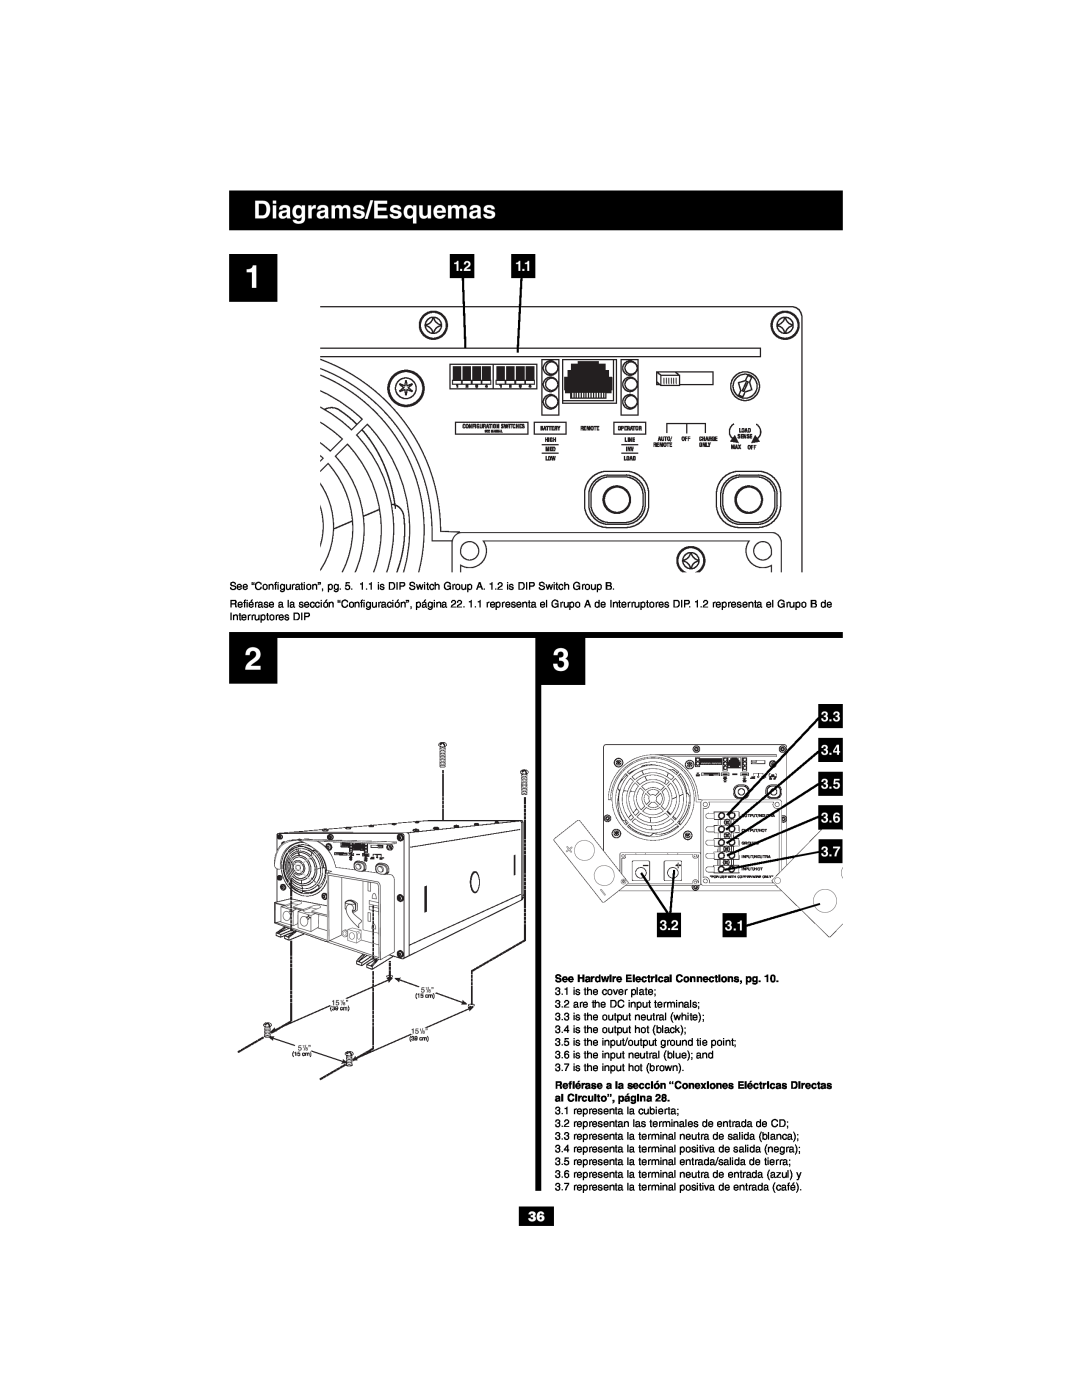 Tripp Lite Alternative Power Source owner manual Diagrams/Esquemas, See Hardwire Electrical Connections, pg 